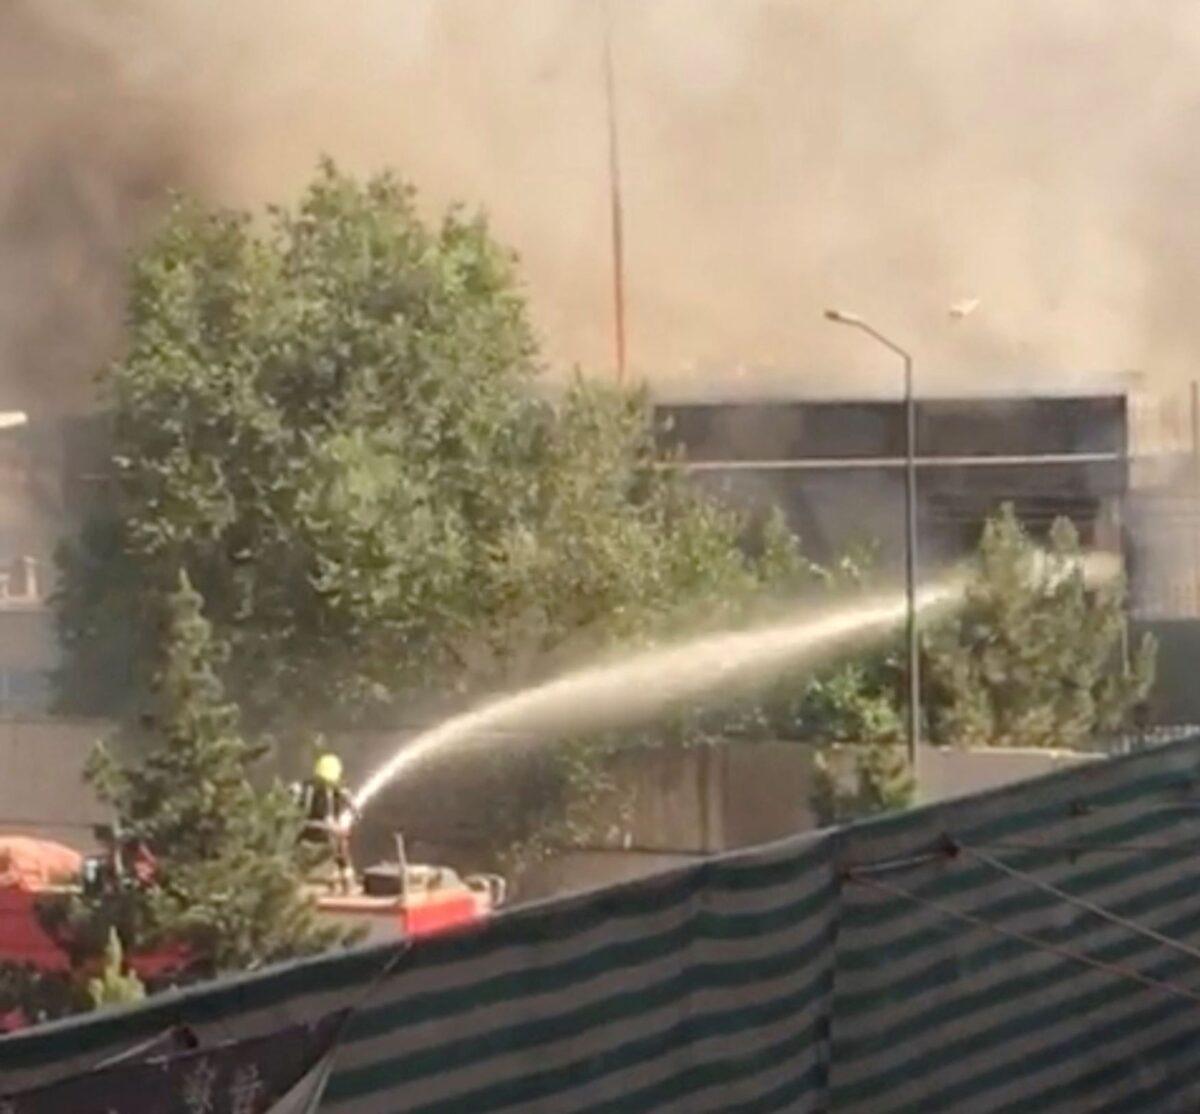 Firefighters try to hose down a fire at a building near a Sikh temple following a blast in a car loaded with explosives in Kabul, Afghanistan, on June 18, 2022, in this still from video. (Social media video via Reuters)